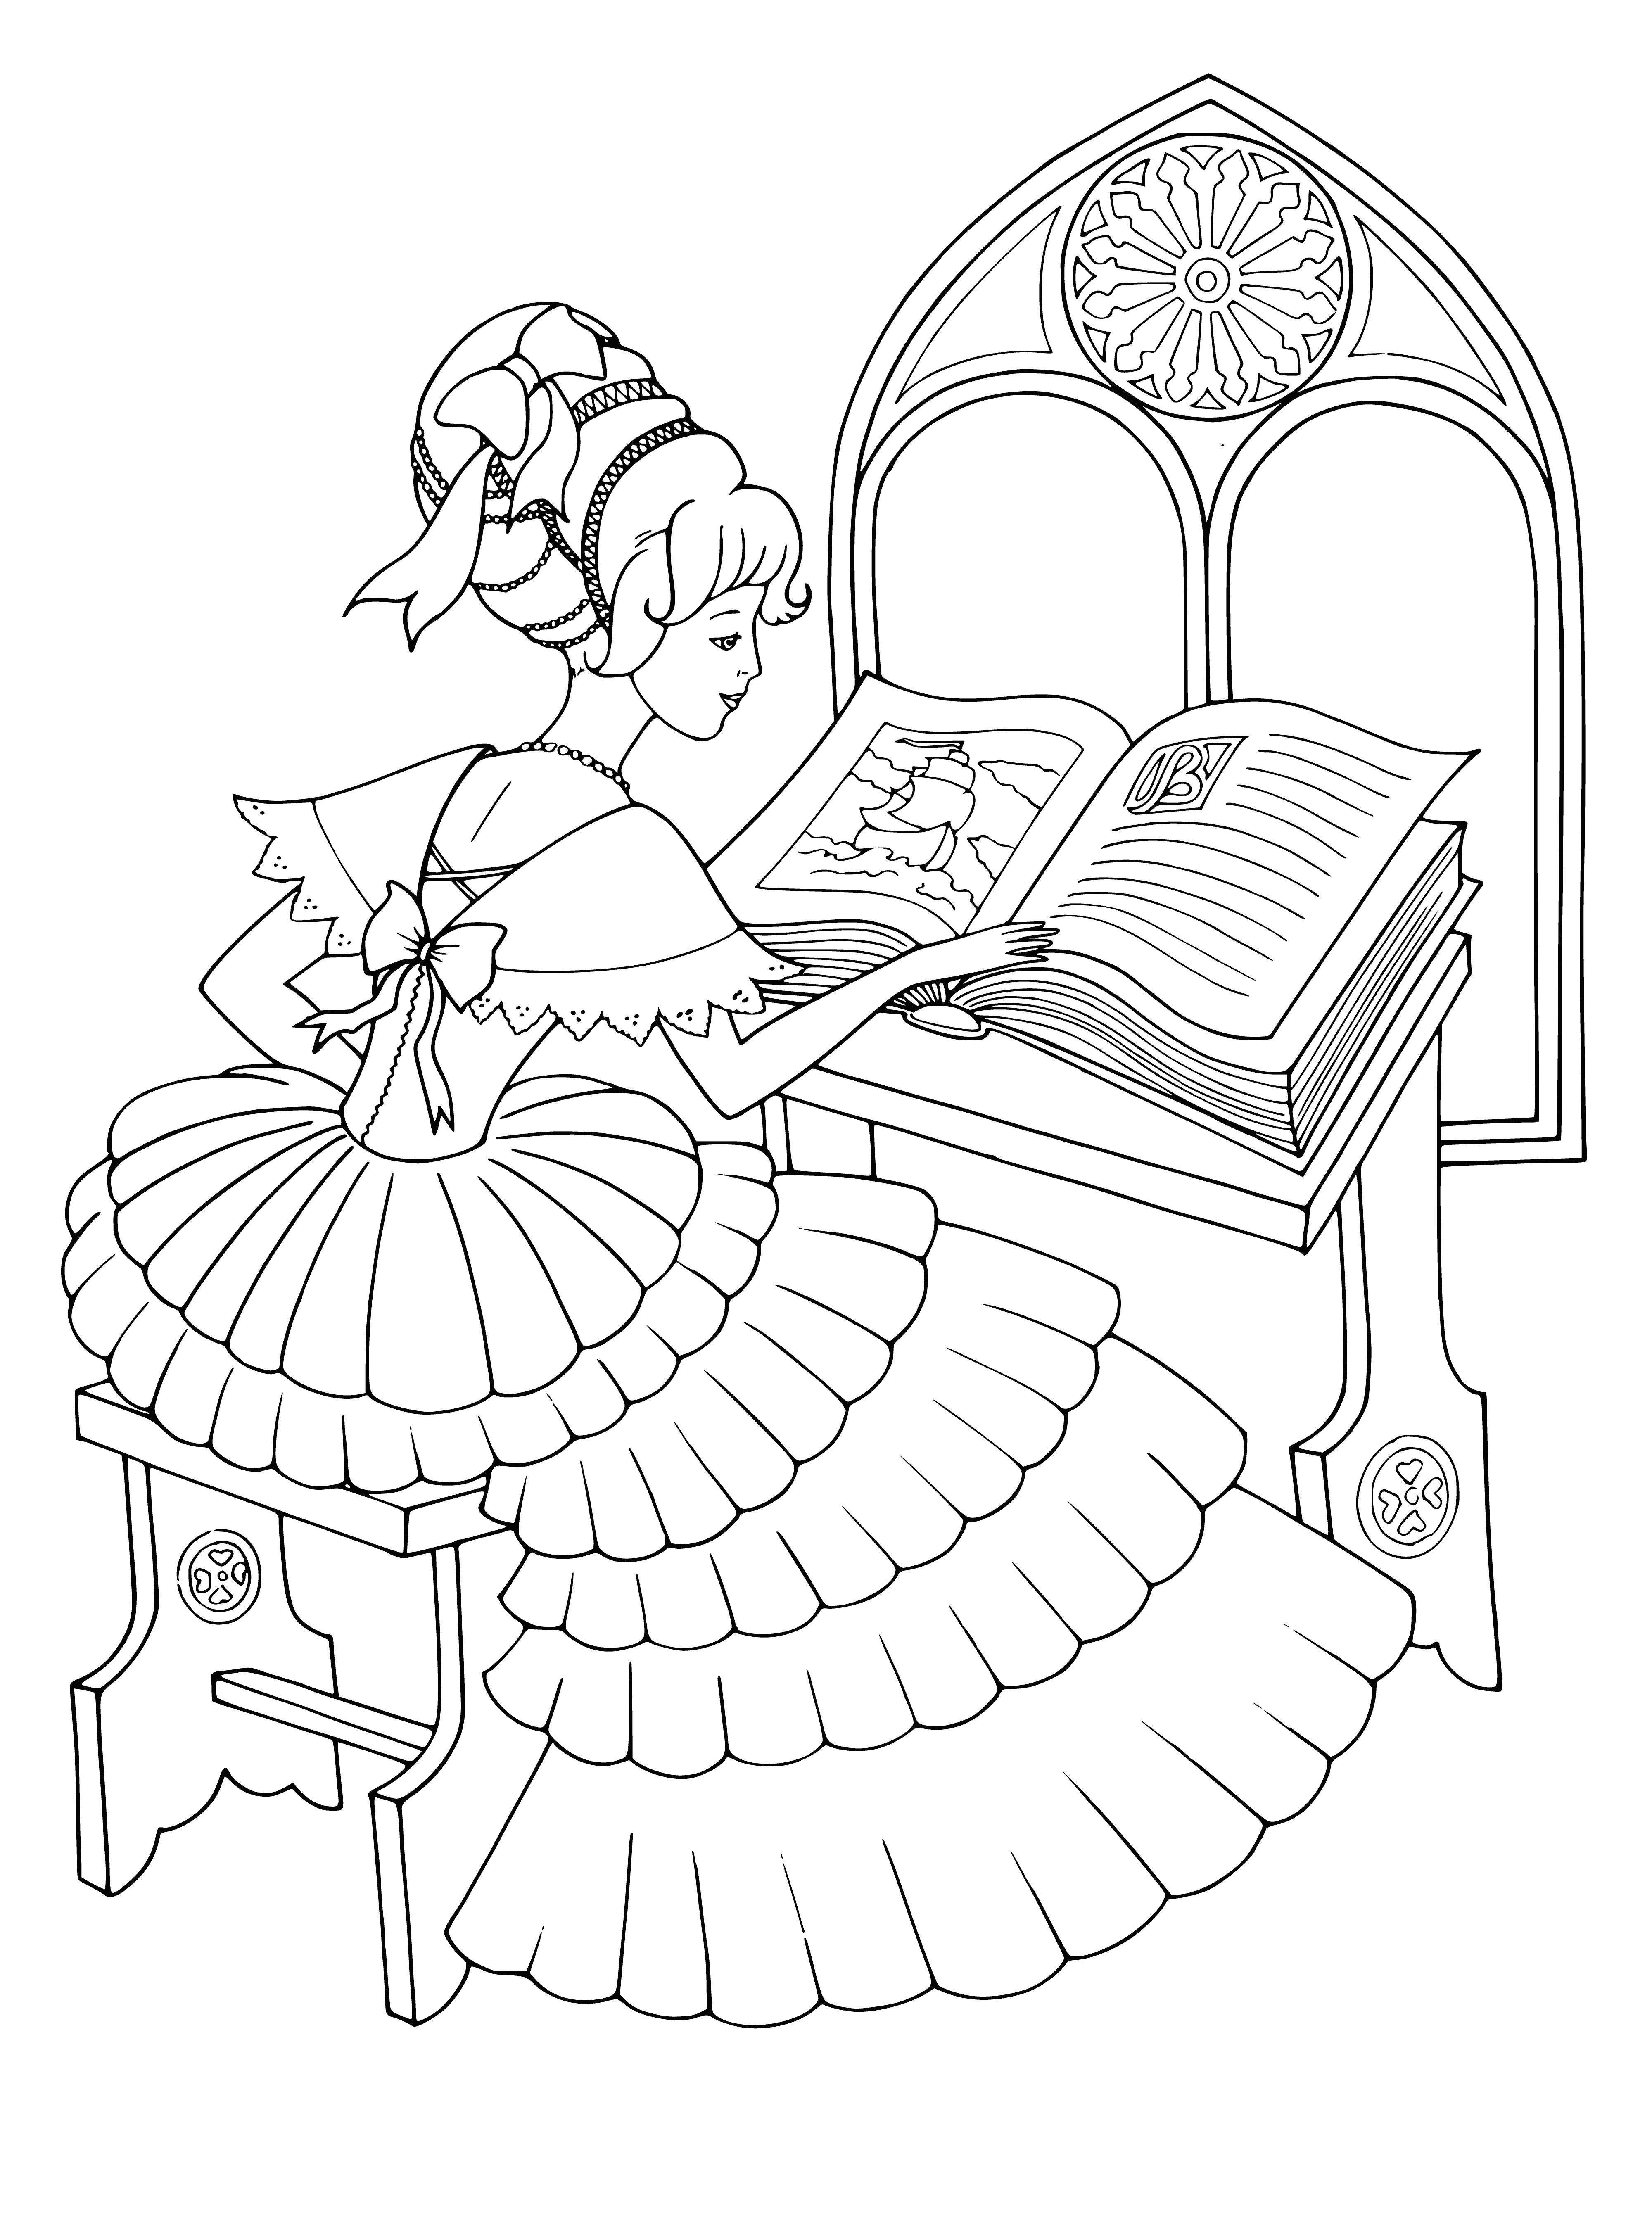 Reading fairy tales coloring page